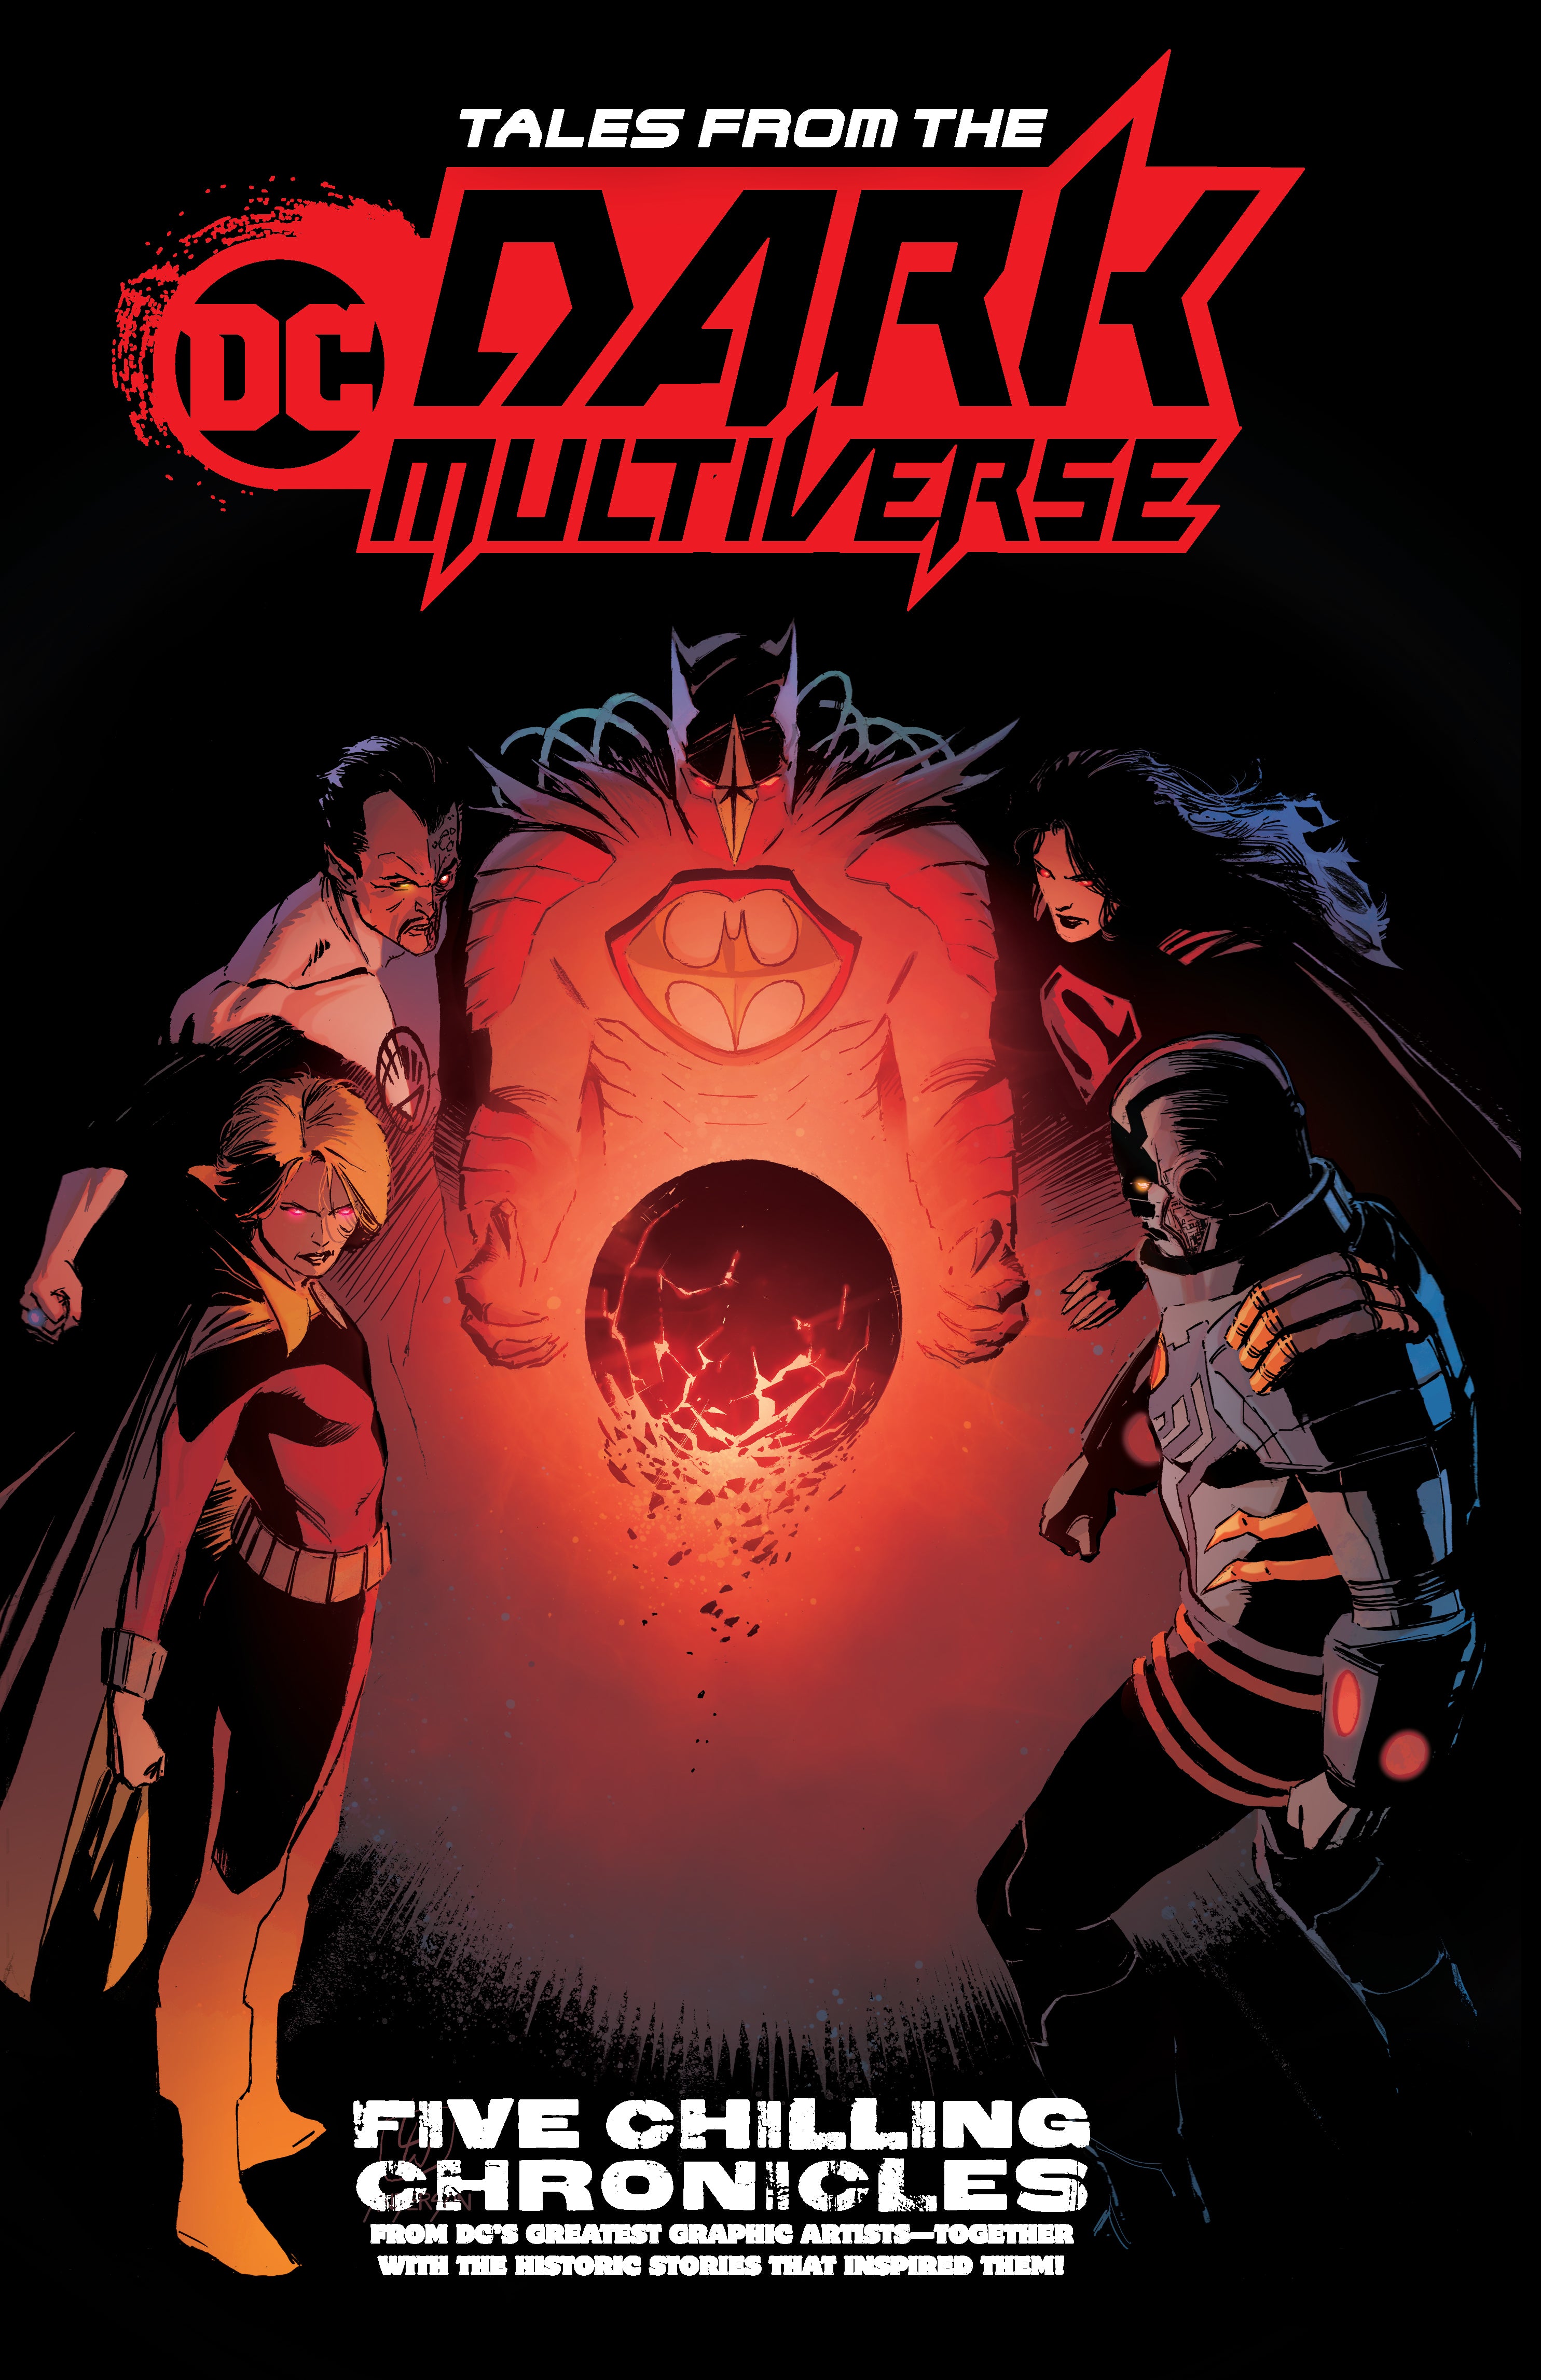 TALES FROM THE DC DARK MULTIVERSE TRADE PAPERBACK